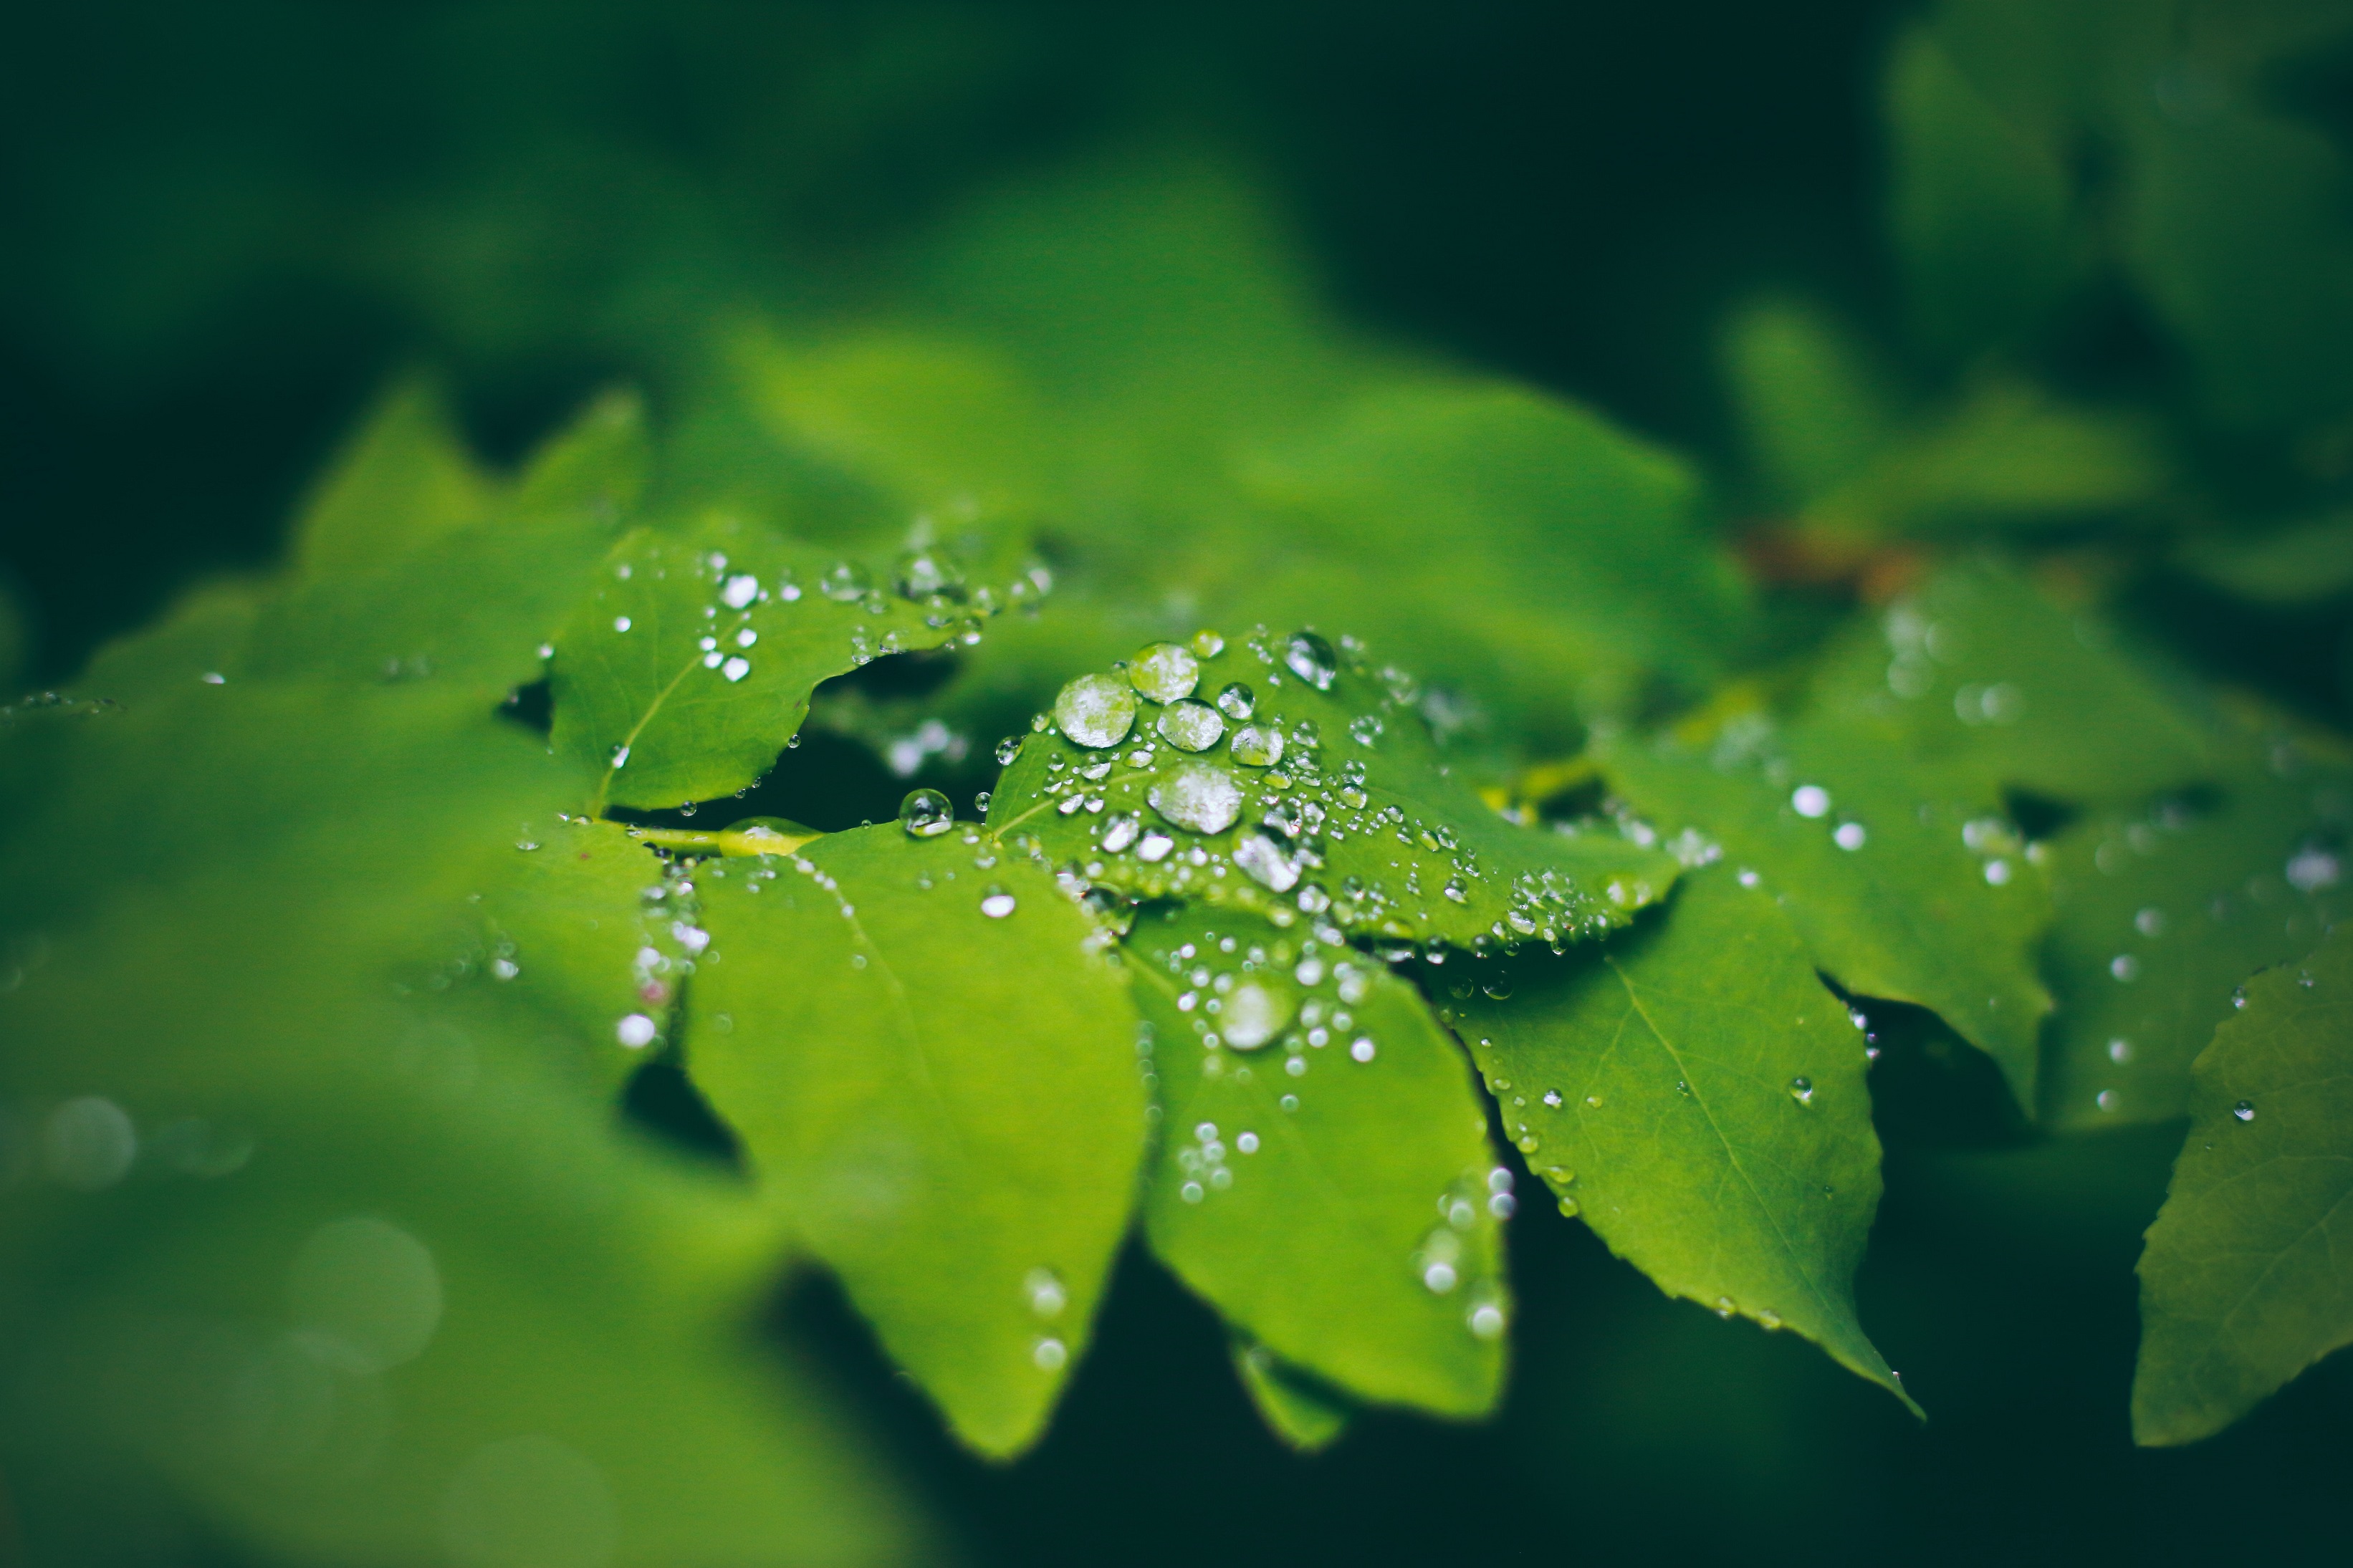 Water droplets gather on leaves in the Alaskan rainforest, Ketchikan HD ...